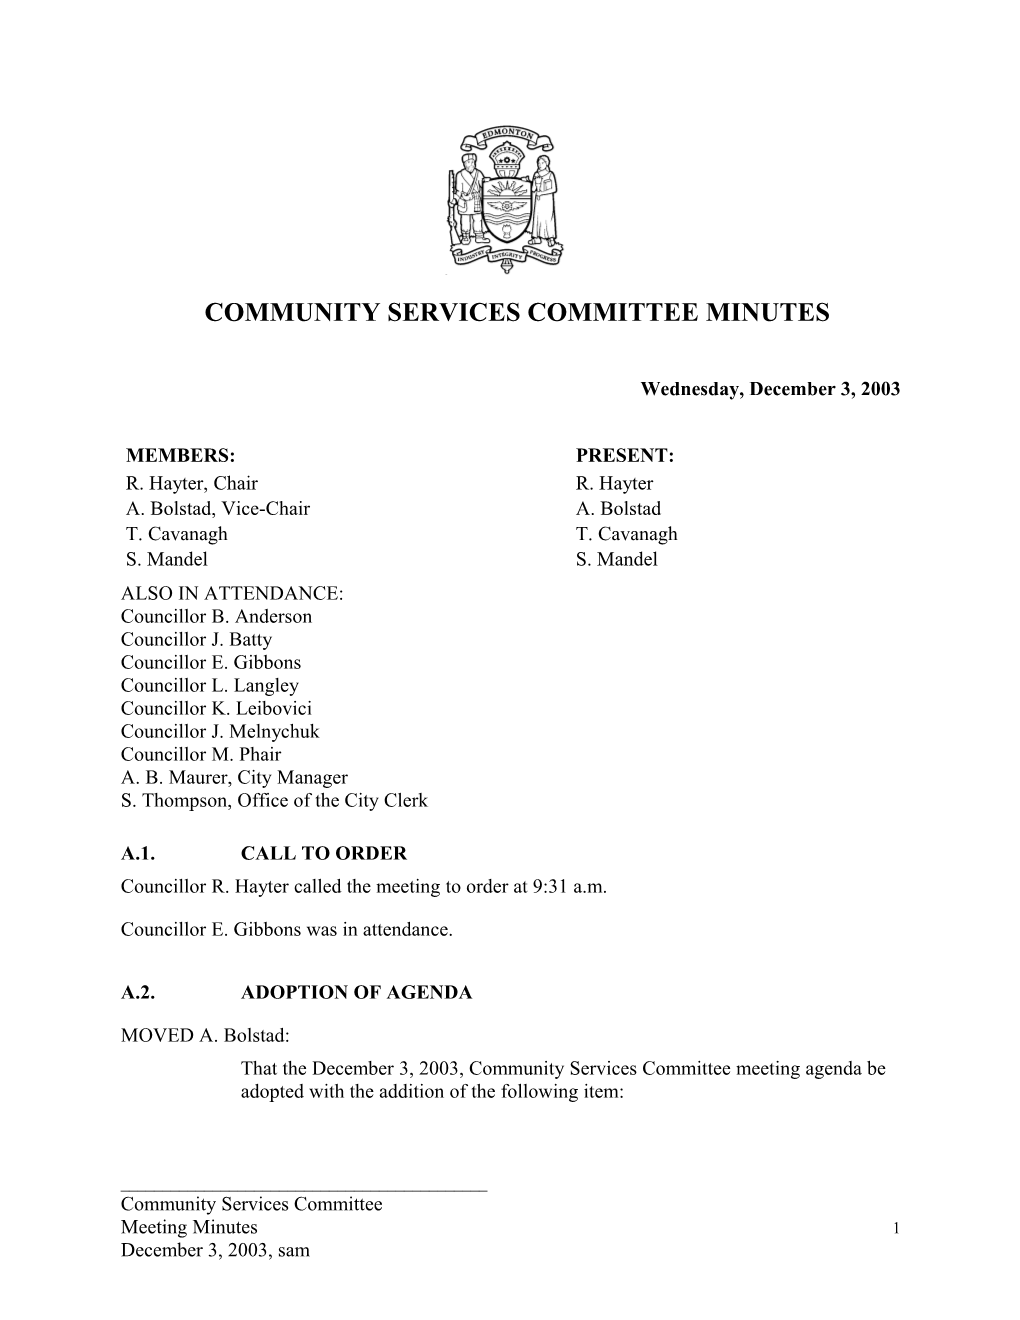 Minutes for Community Services Committee December 3, 2003 Meeting